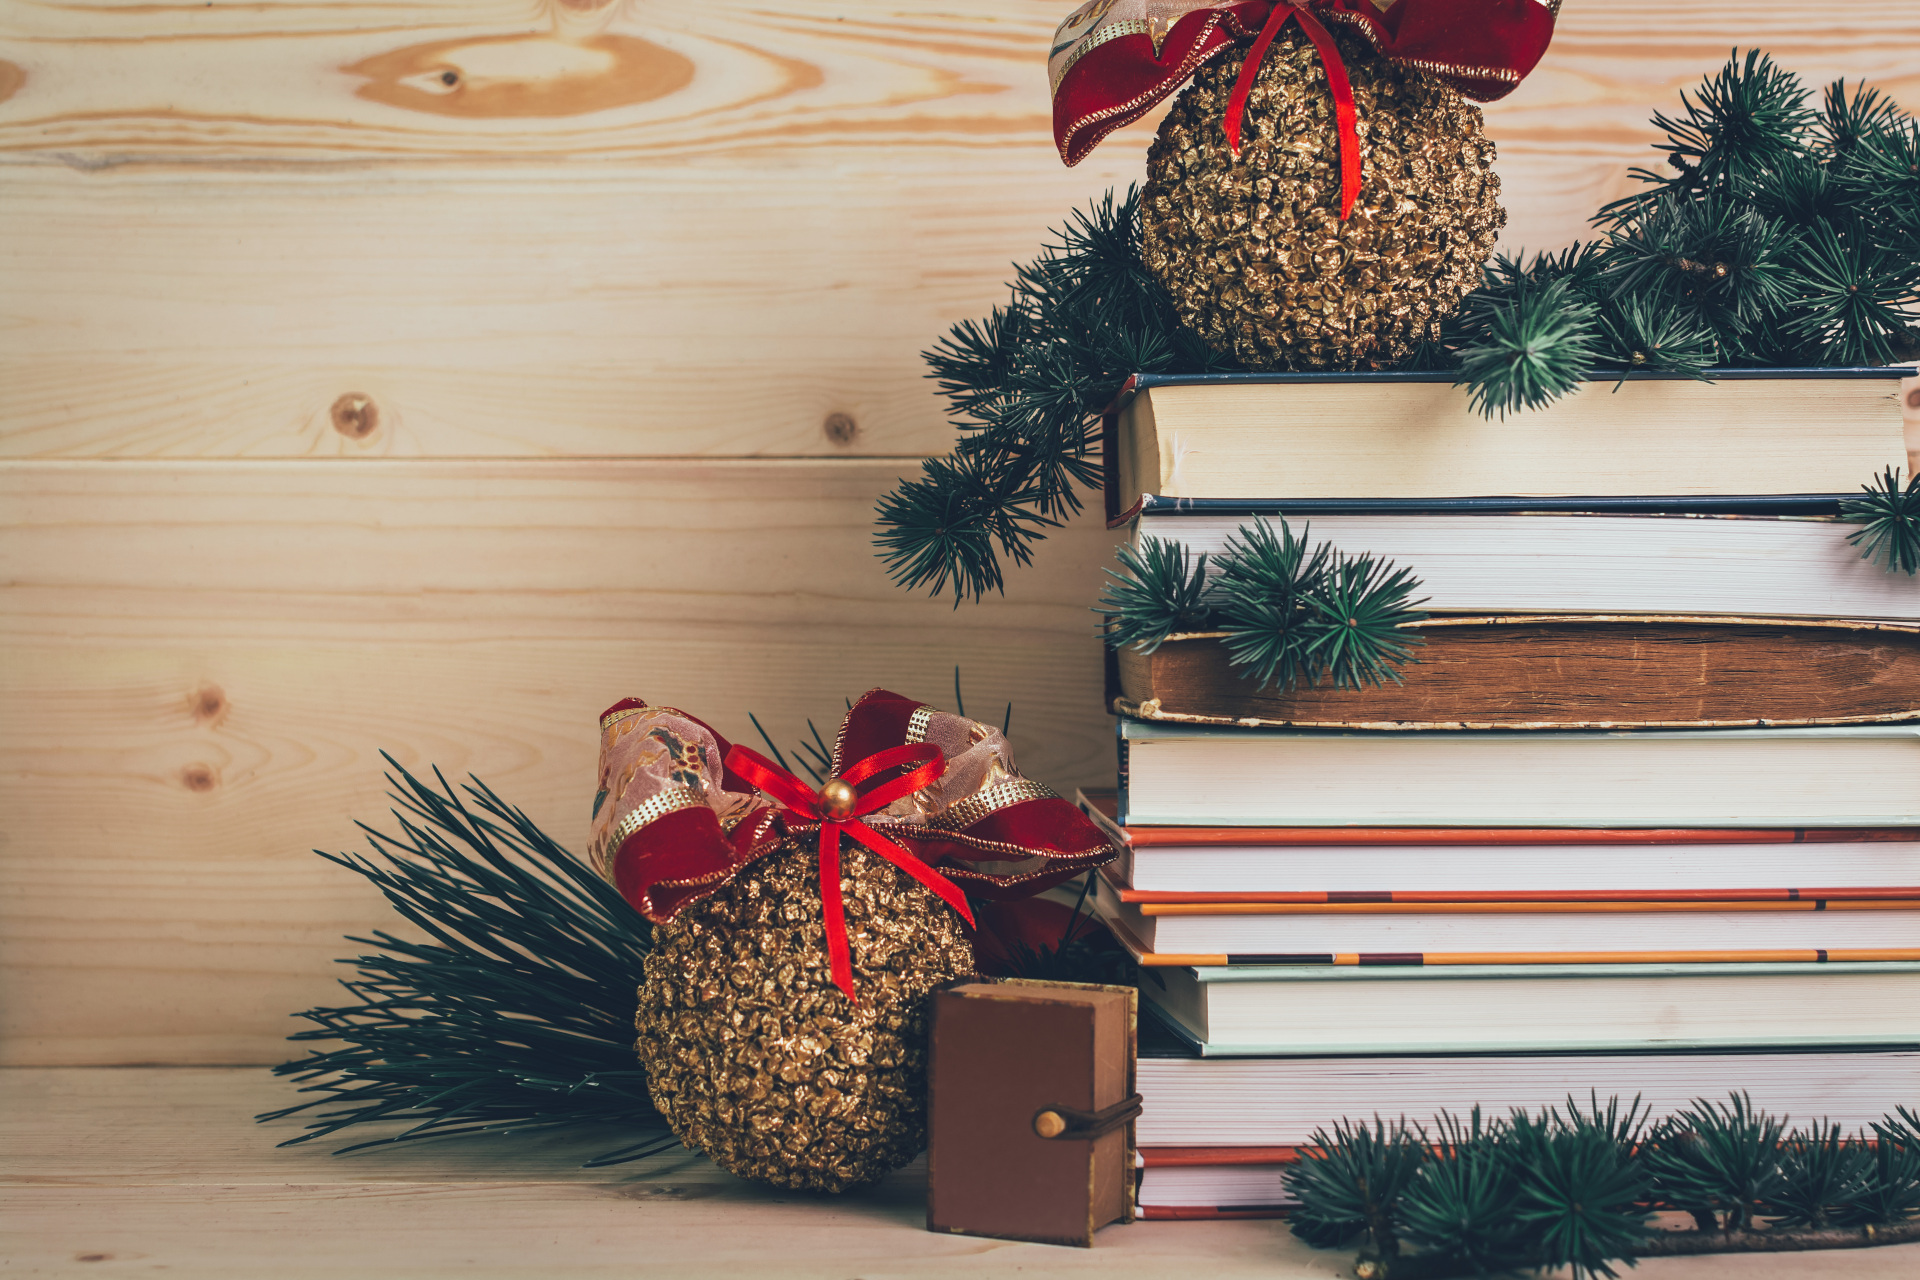 Books-gifts for Christmas with decoration on a wooden background